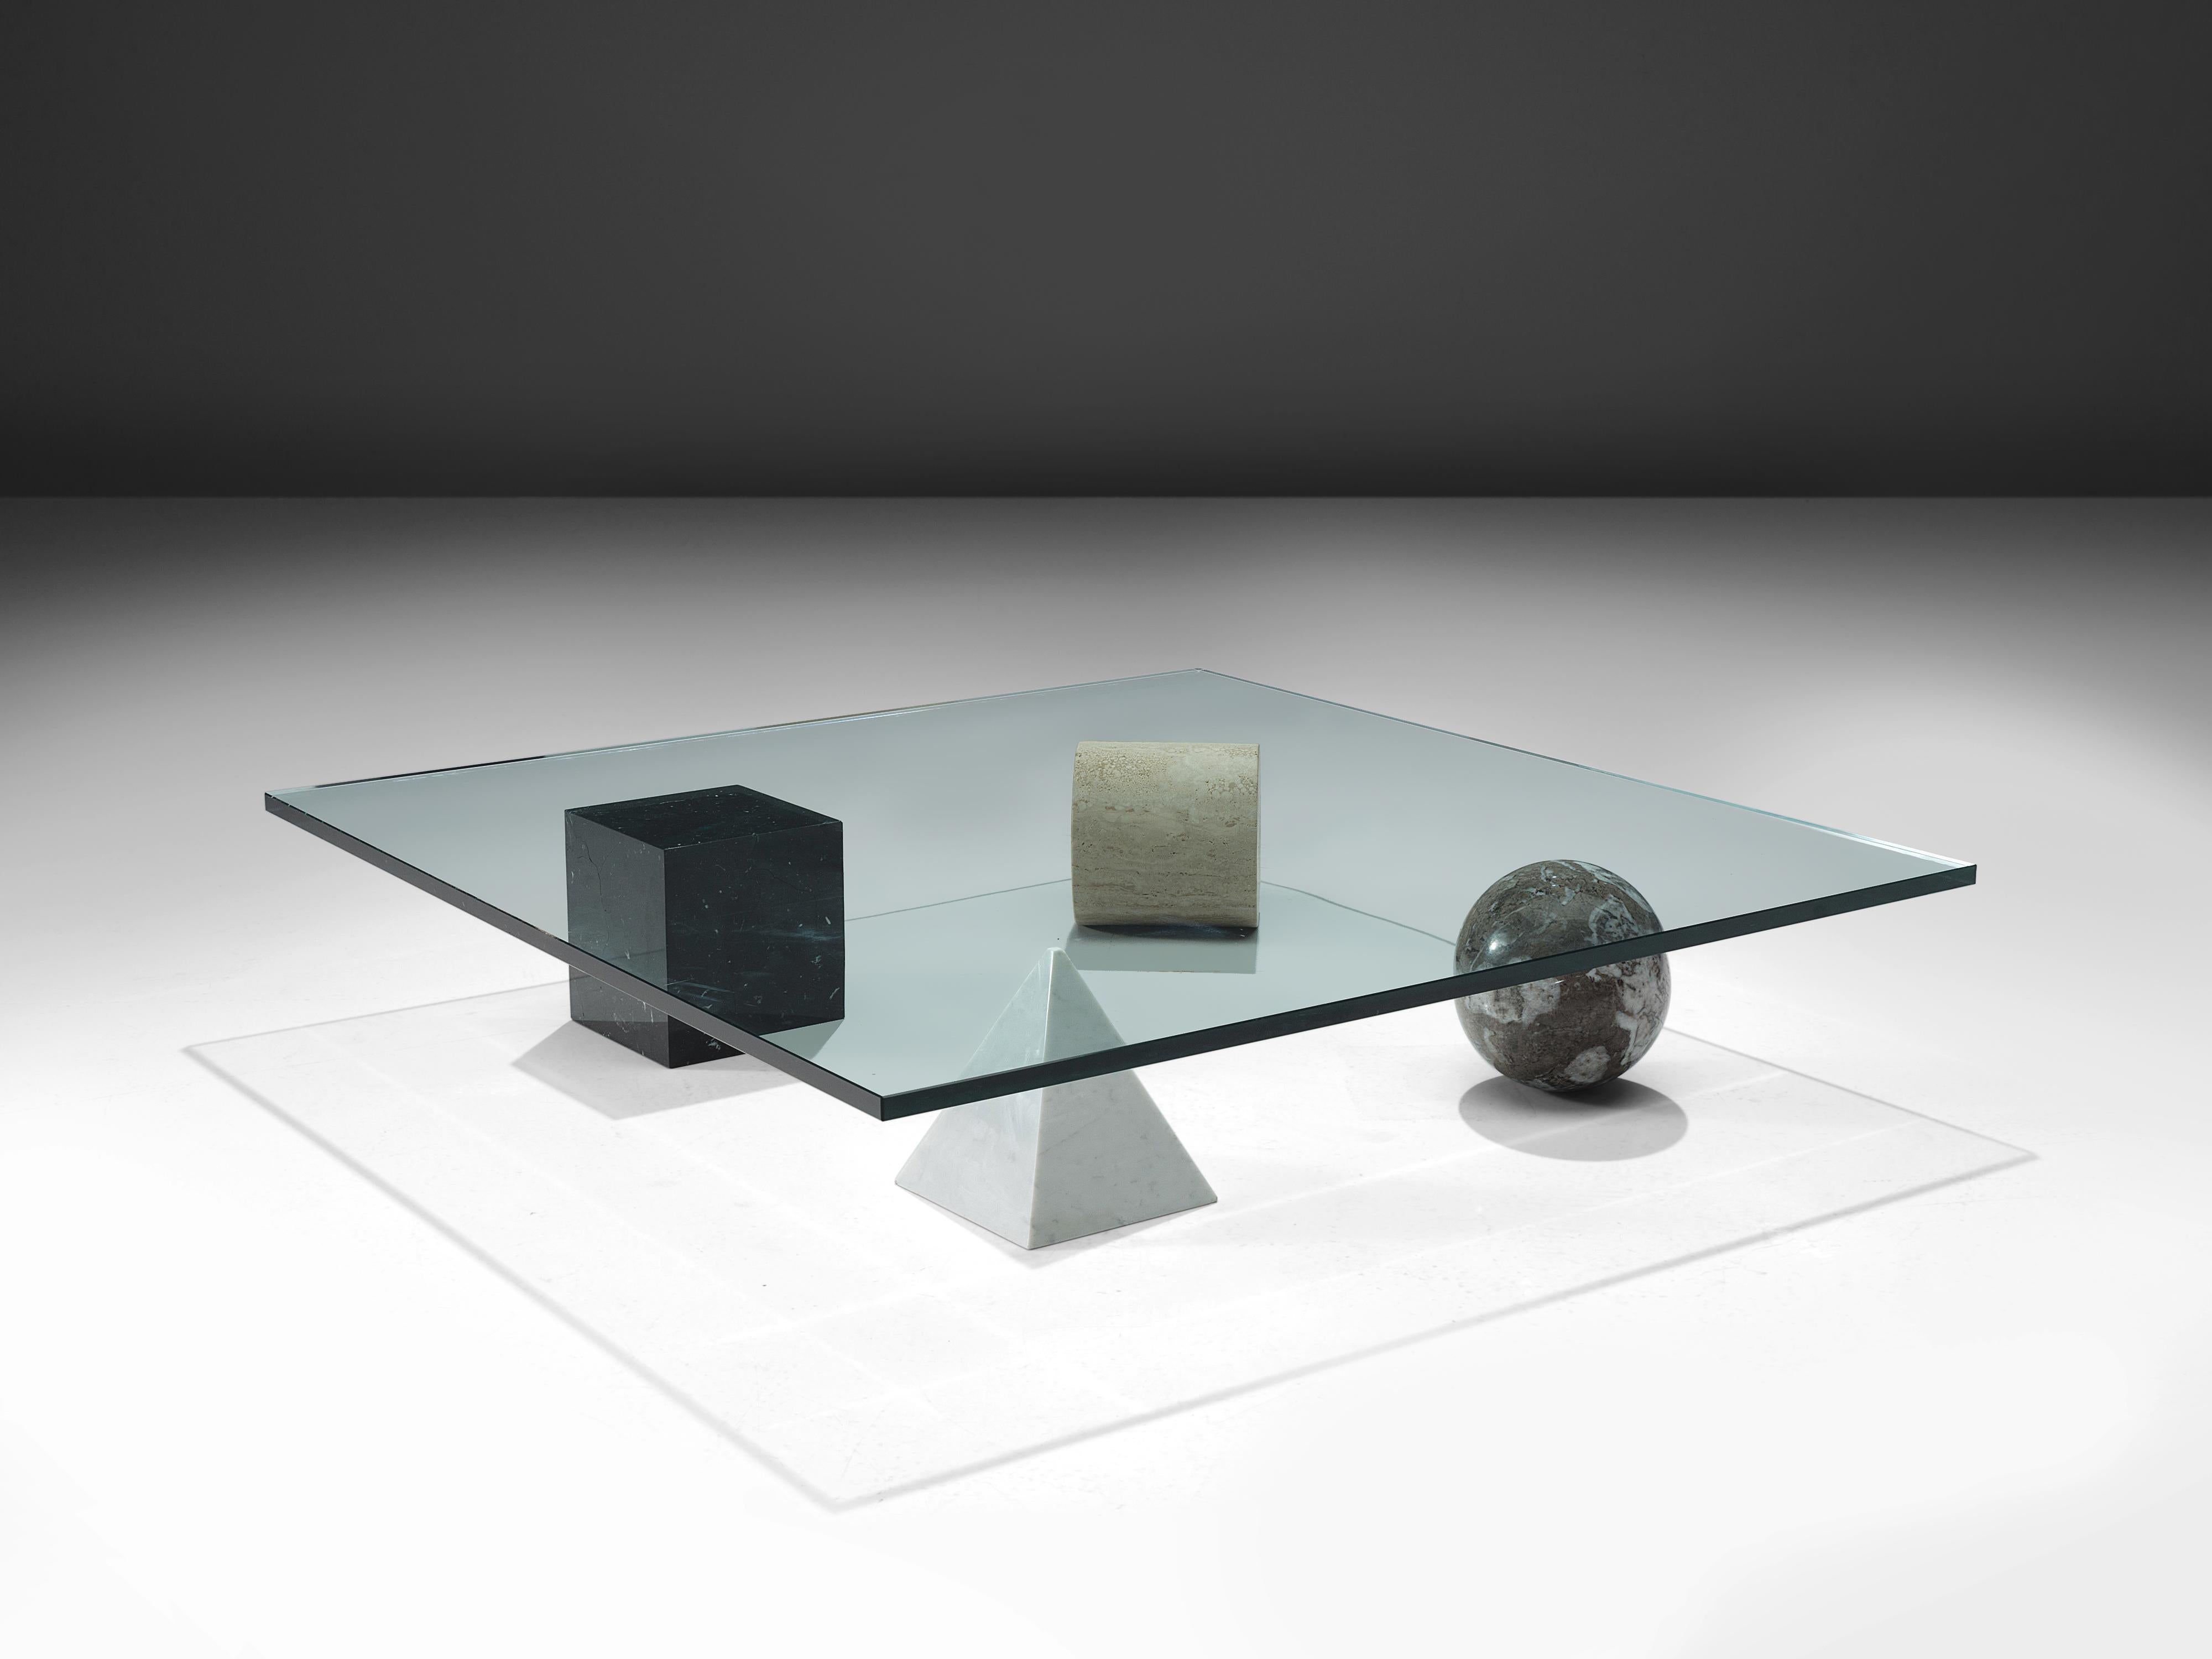 Lella and Massimo Vignelli, coffee table ‘Metaphora’, marble, stone, glass, Italy, 1979

Stunning coffee table by Italian designers Lella and Massimo Vignelli. Four geometric elements lift up the square tabletop. The glass top allows the view to the